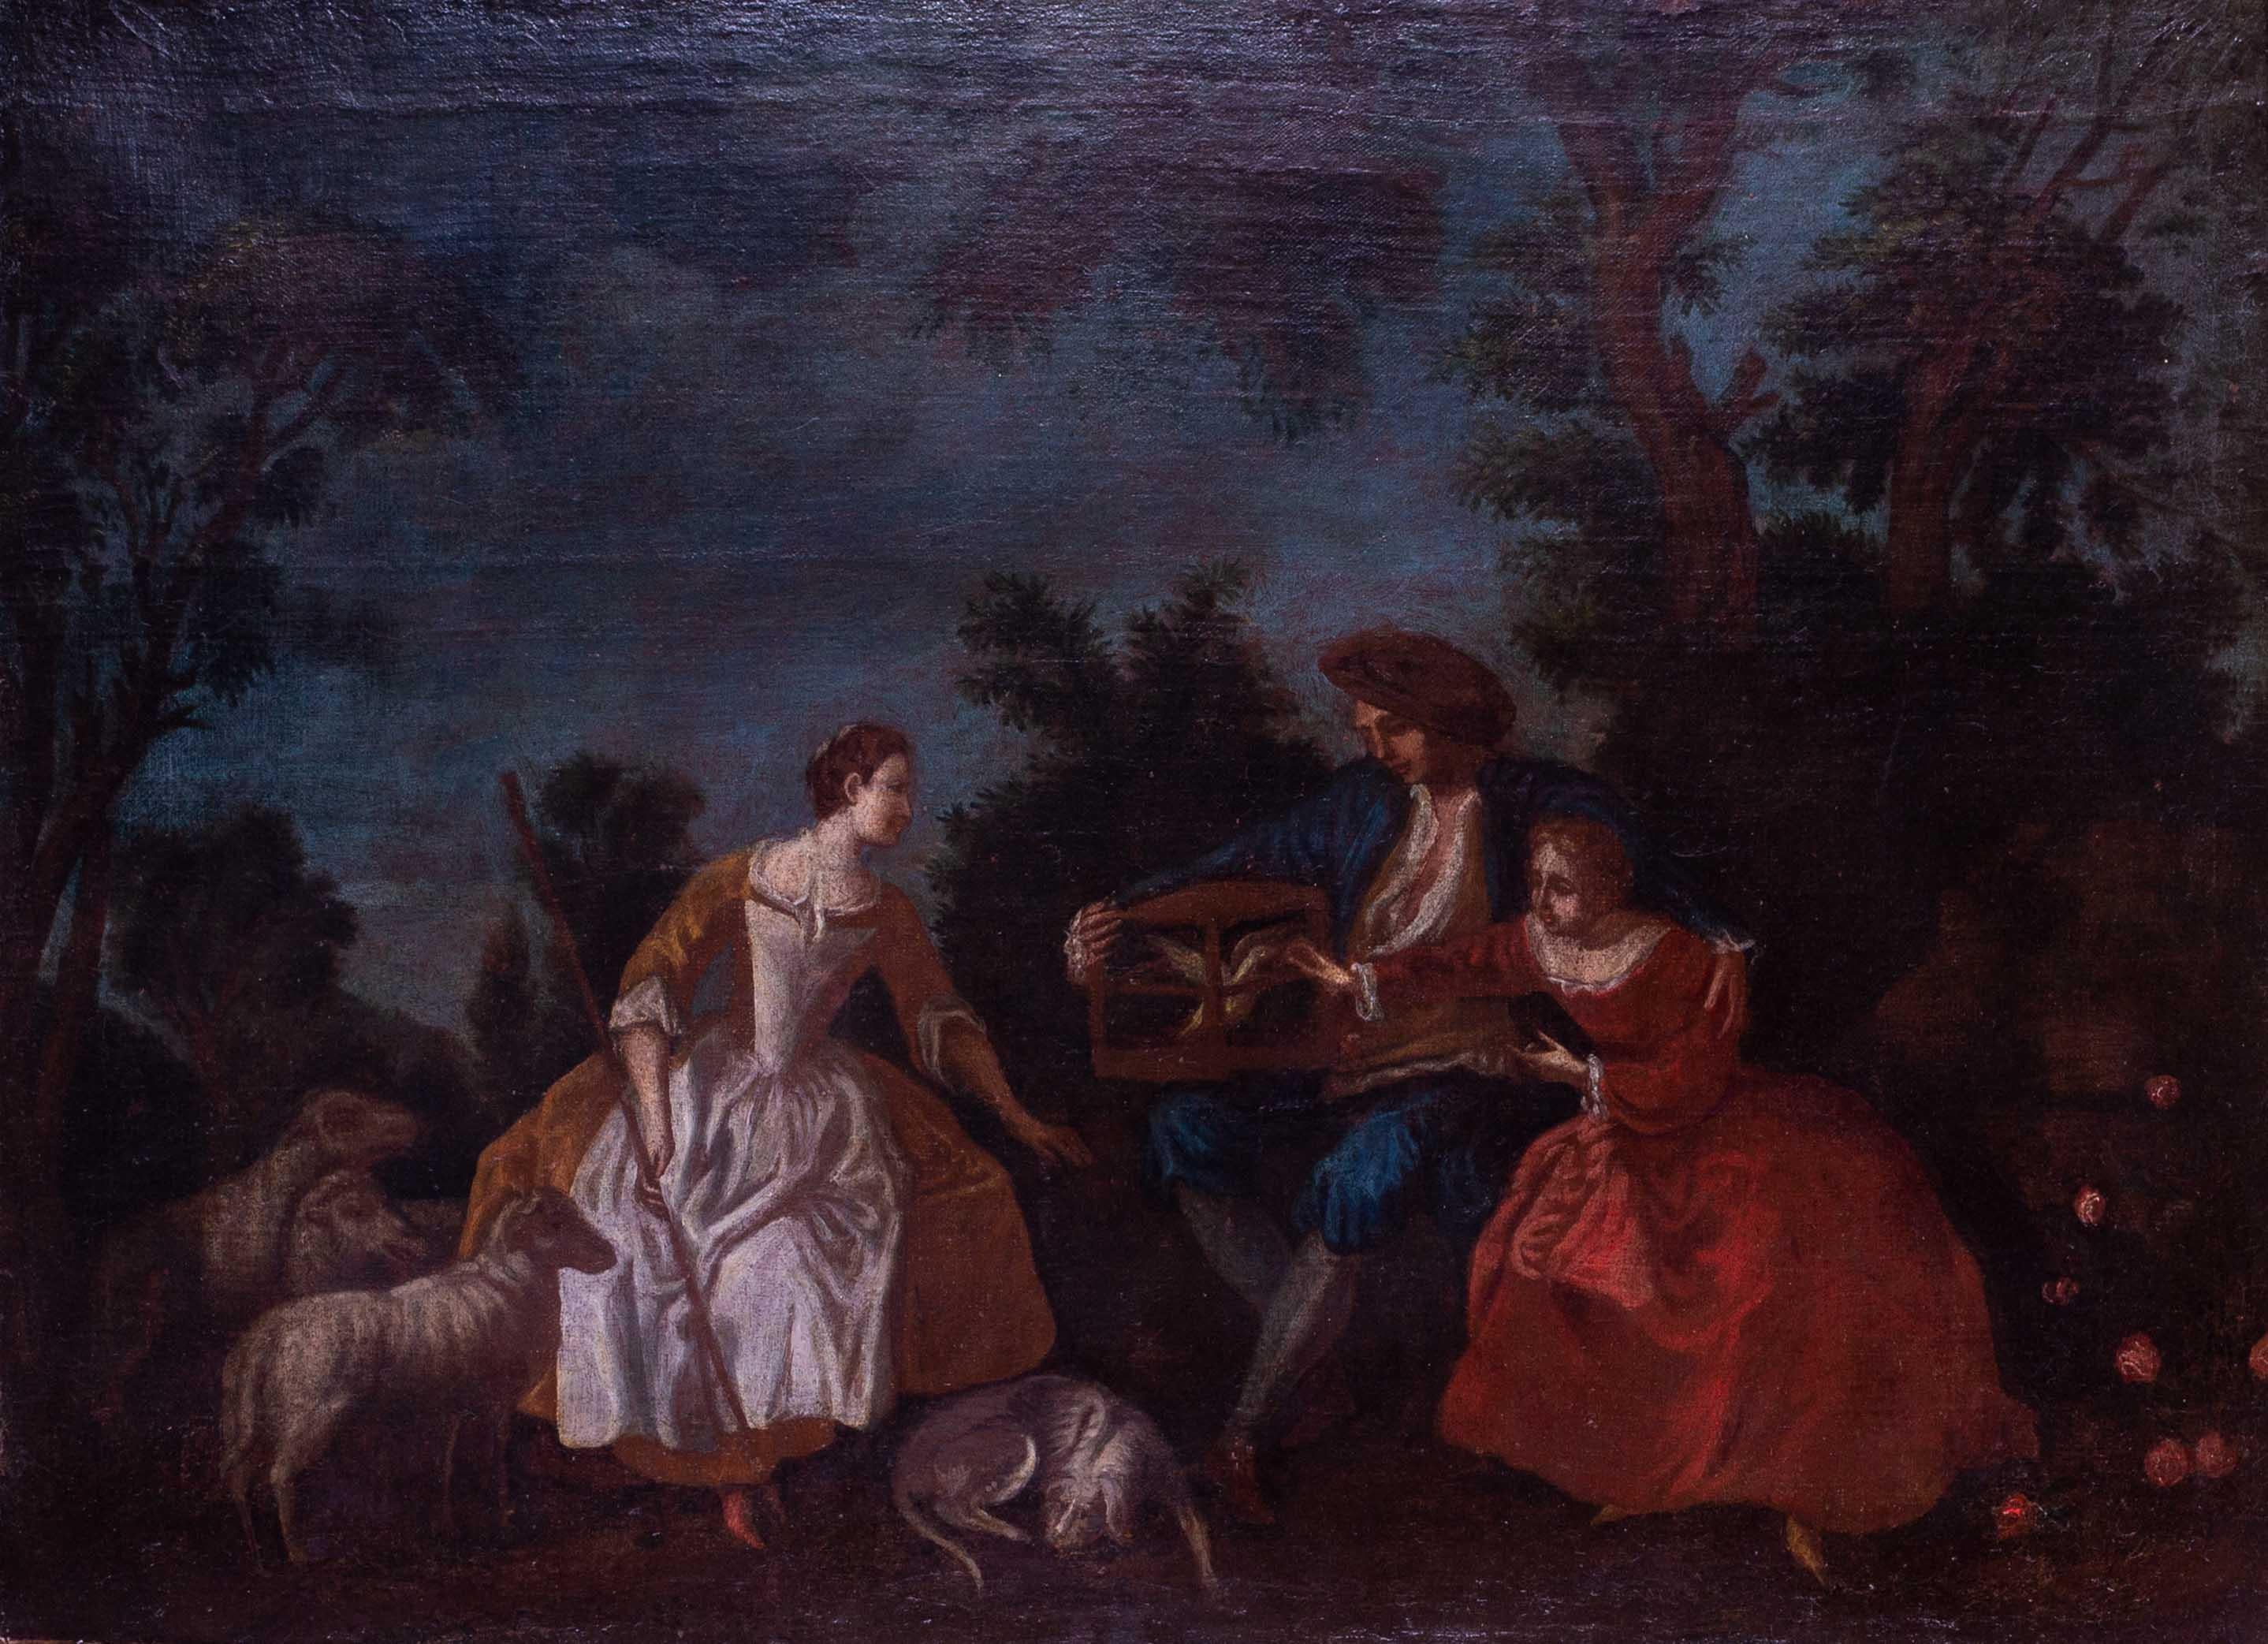 French Old Master oil painting of 3 figures releasing a dove - Painting by Jean-Antoine Watteau